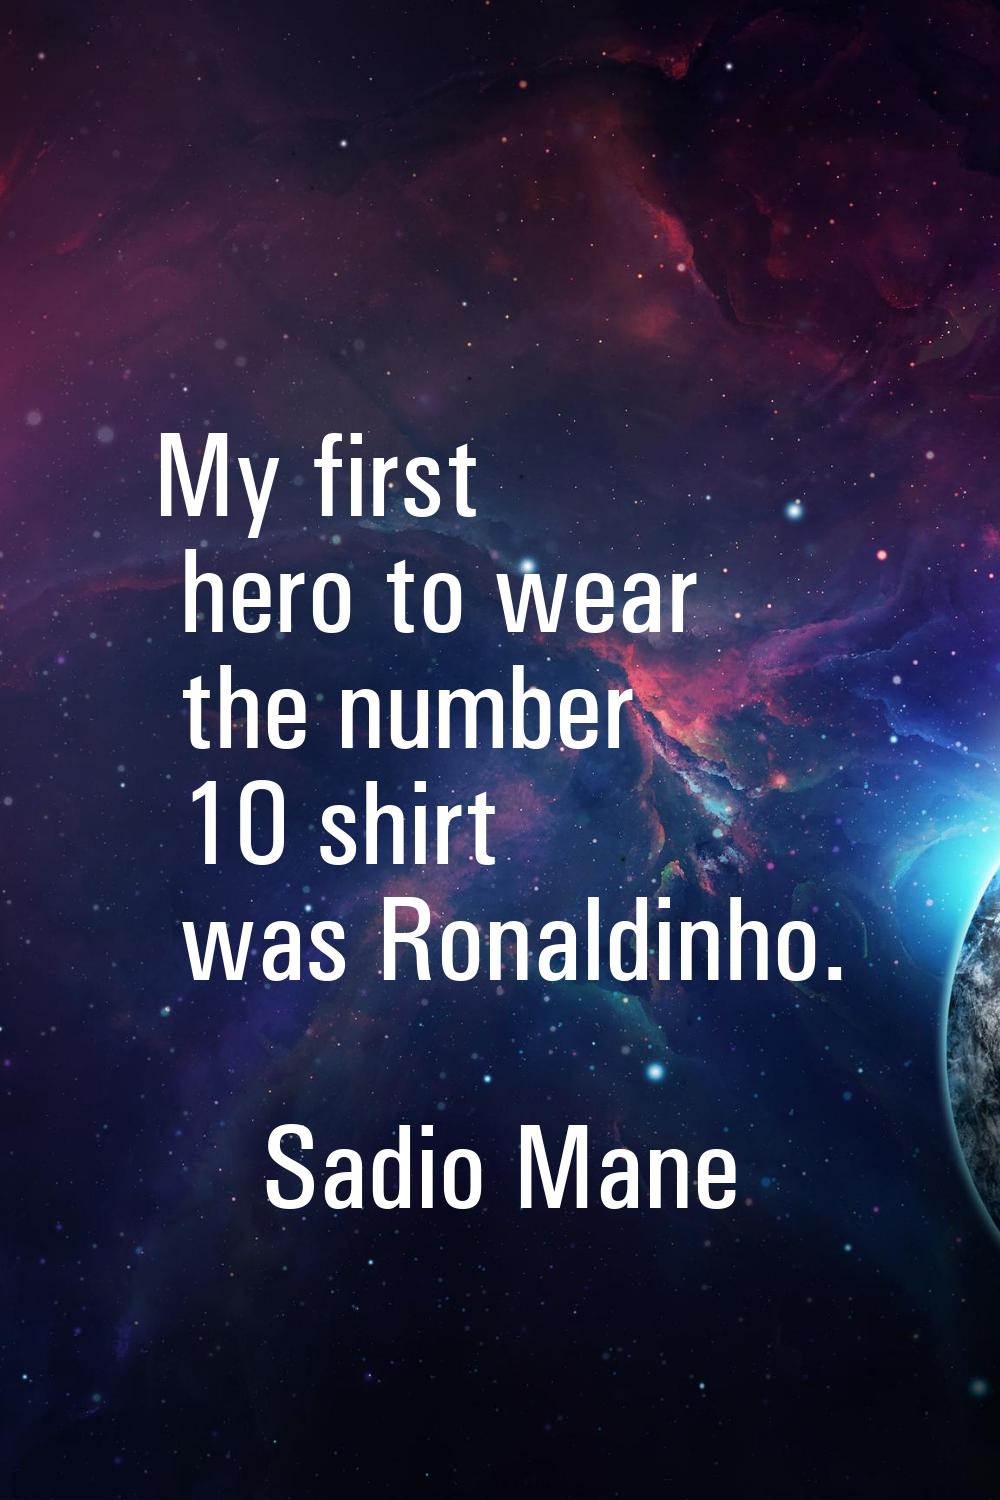 My first hero to wear the number 10 shirt was Ronaldinho.